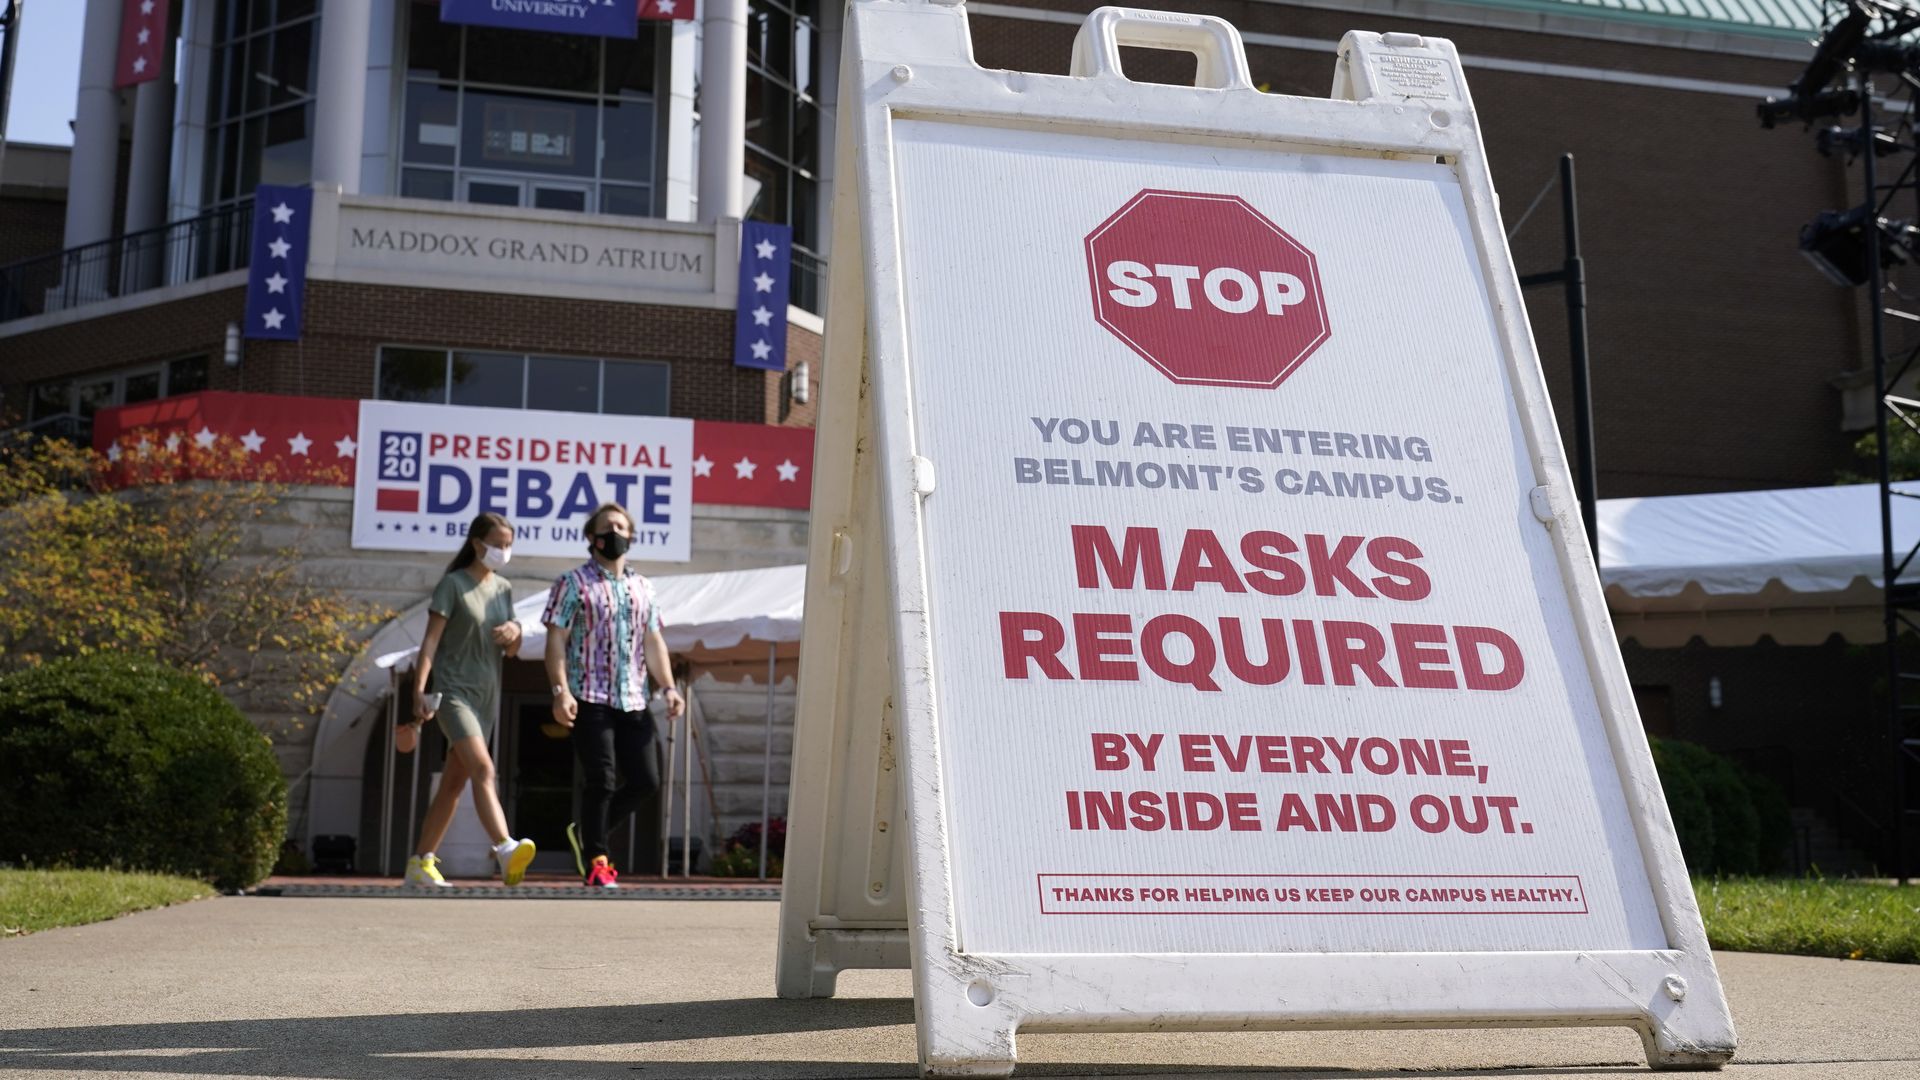 A sign mandating wearing masks greets visitors outside the venue for the second presidential debate.